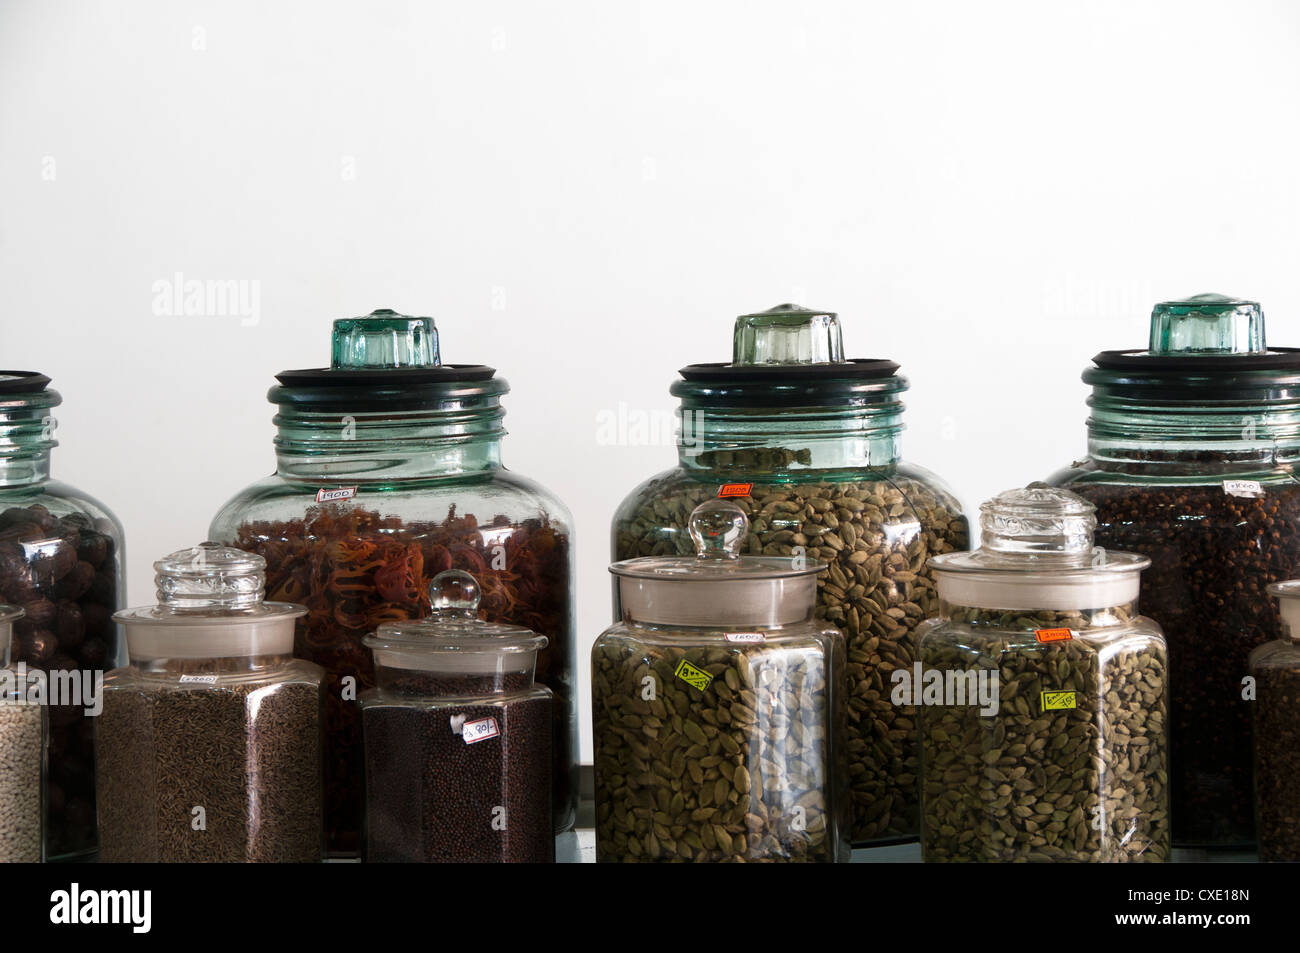 https://c8.alamy.com/comp/CXE18N/spices-in-jars-displayed-at-a-store-in-cochin-CXE18N.jpg